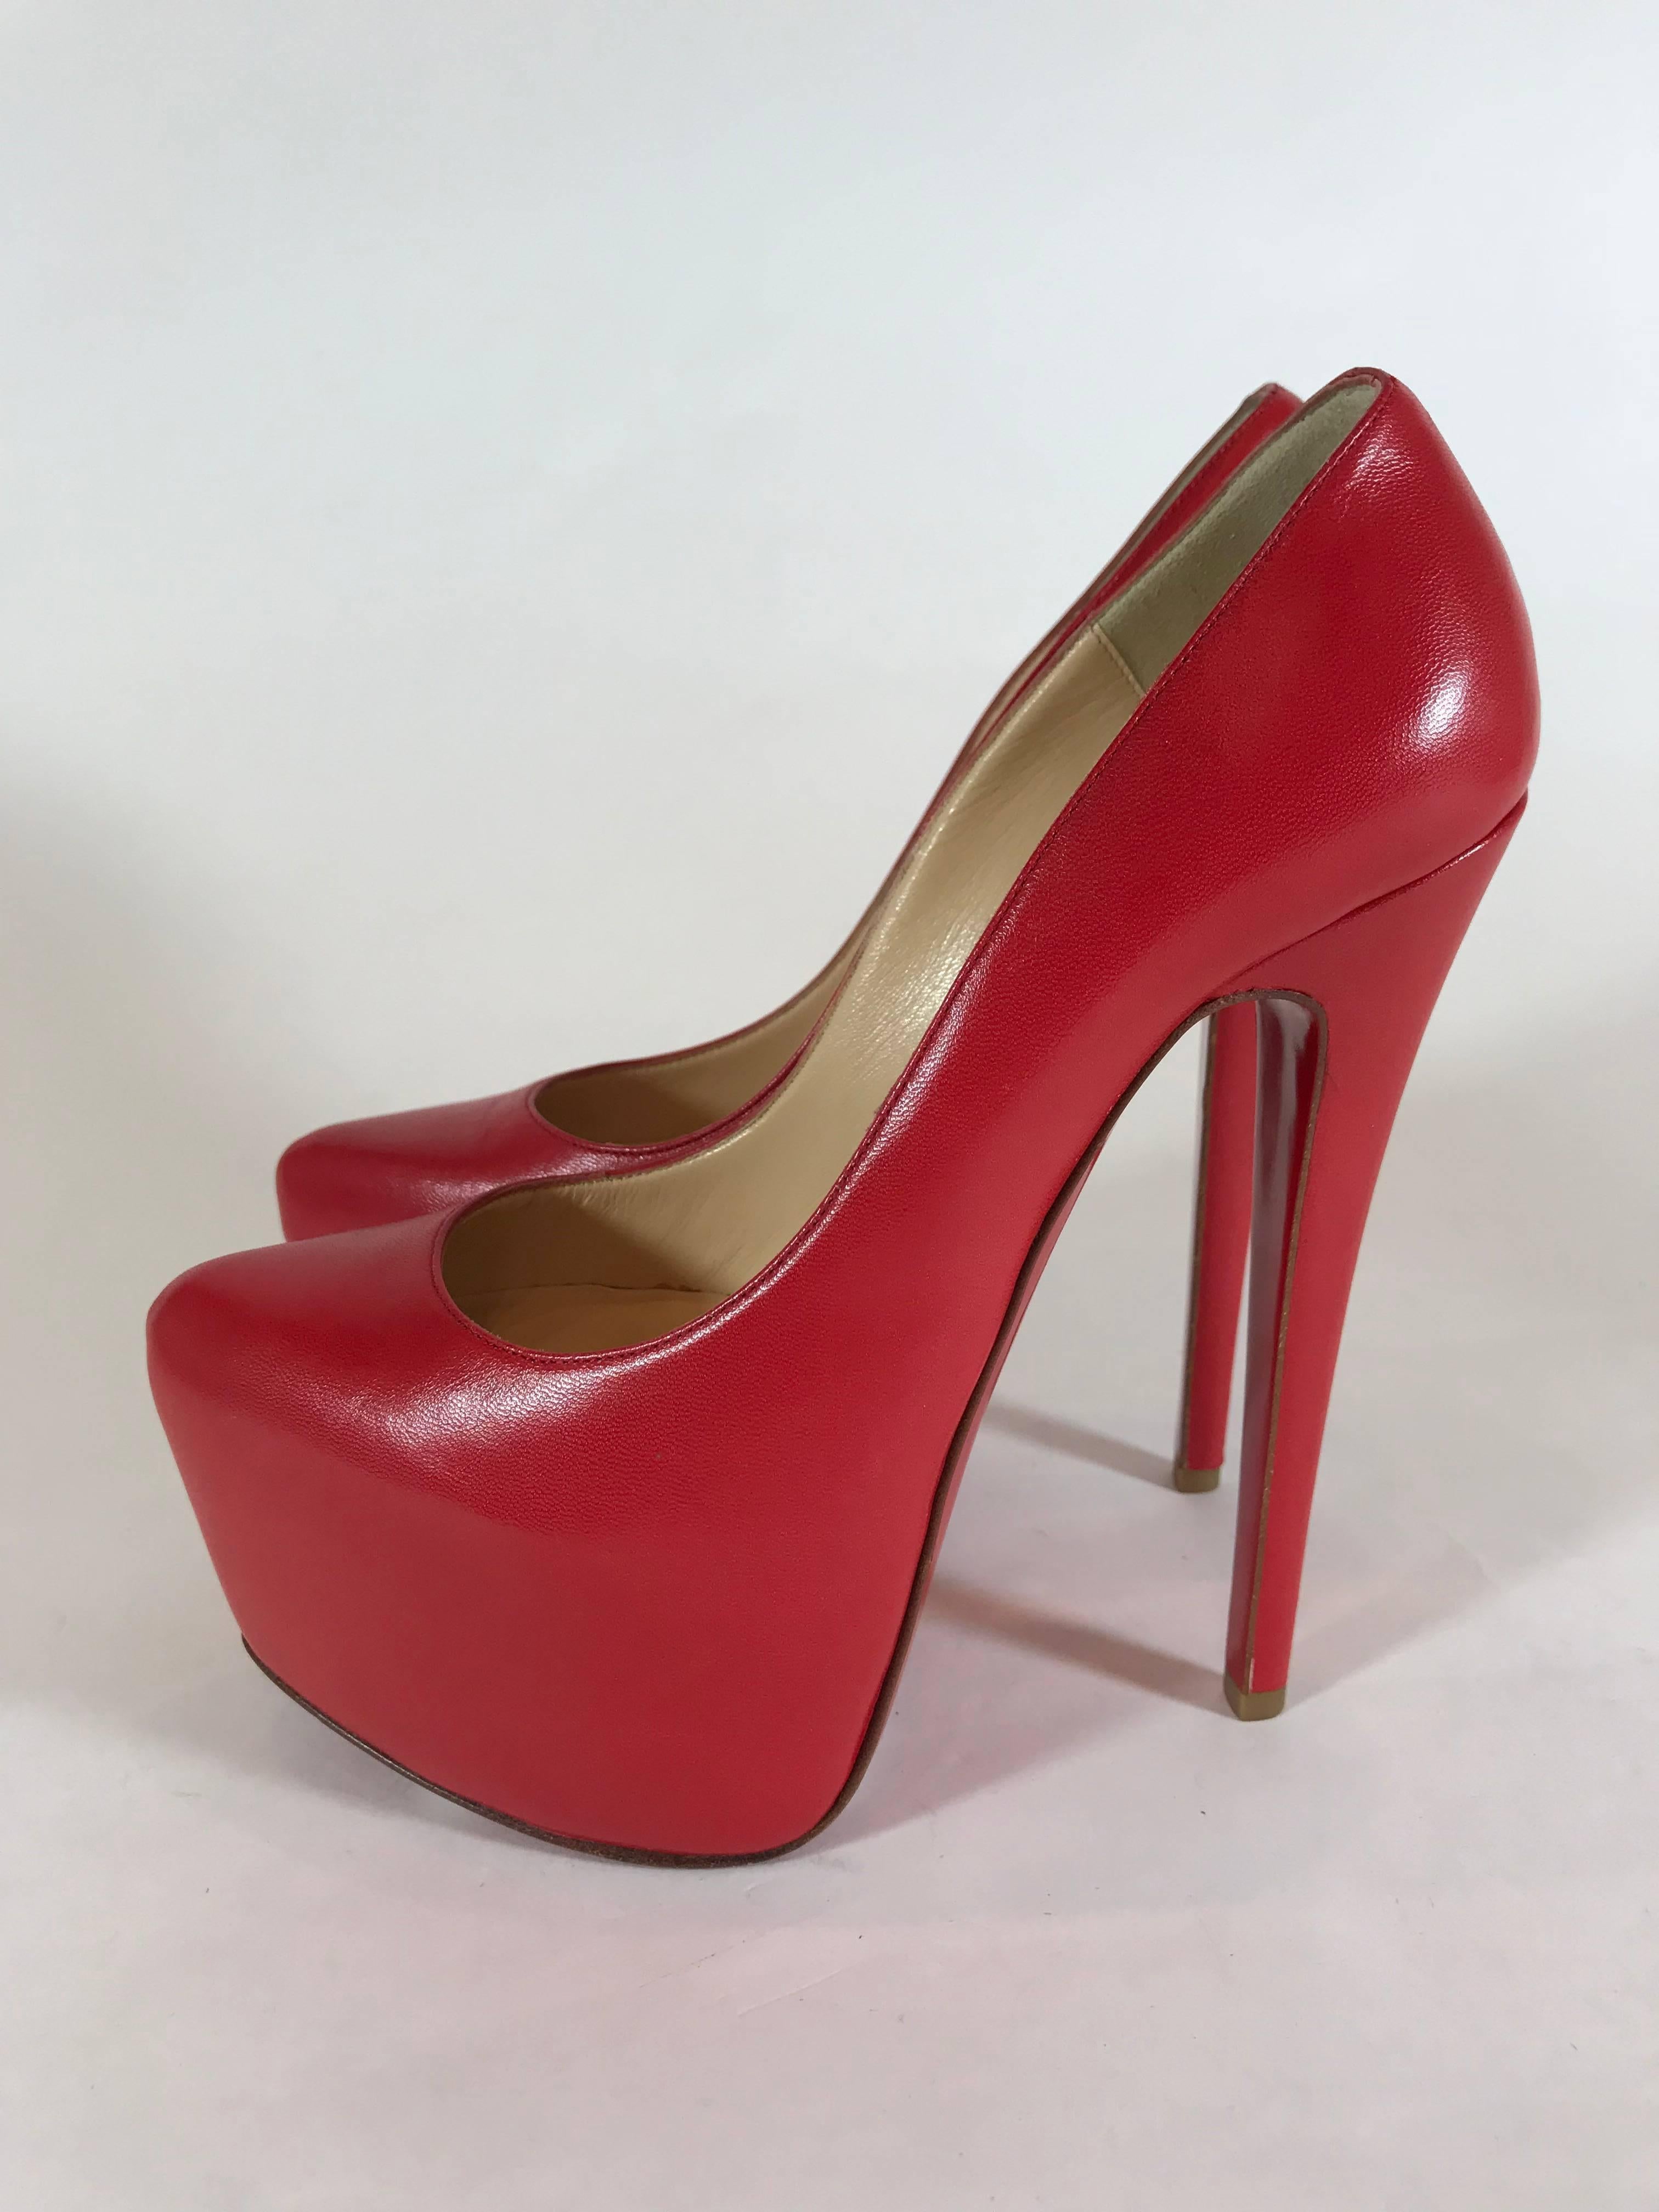 Christian Louboutin red leather 'Daffodil' pump. Soft kidskin leather. Pointed toe with seamed detail. Padded leather insole. Signature glossy red sole. 6